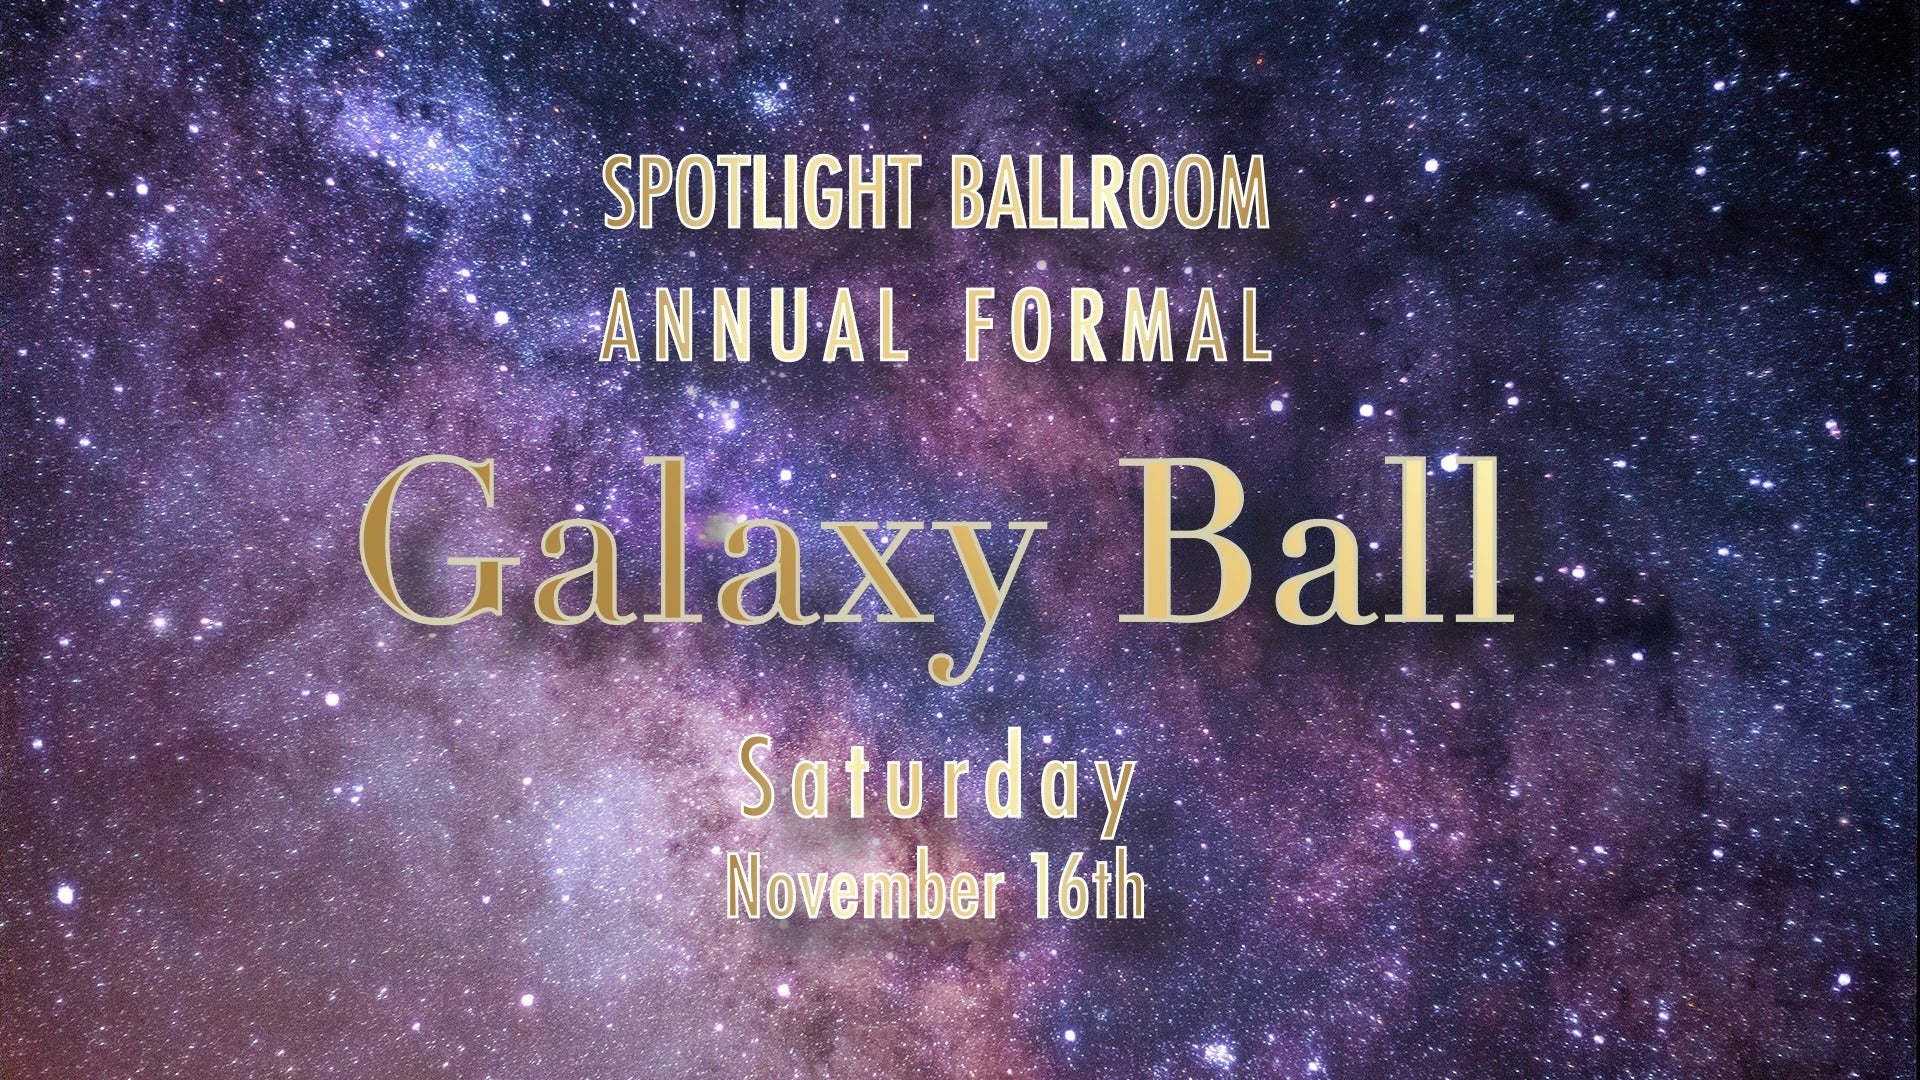 A promotional graphic for the ball.